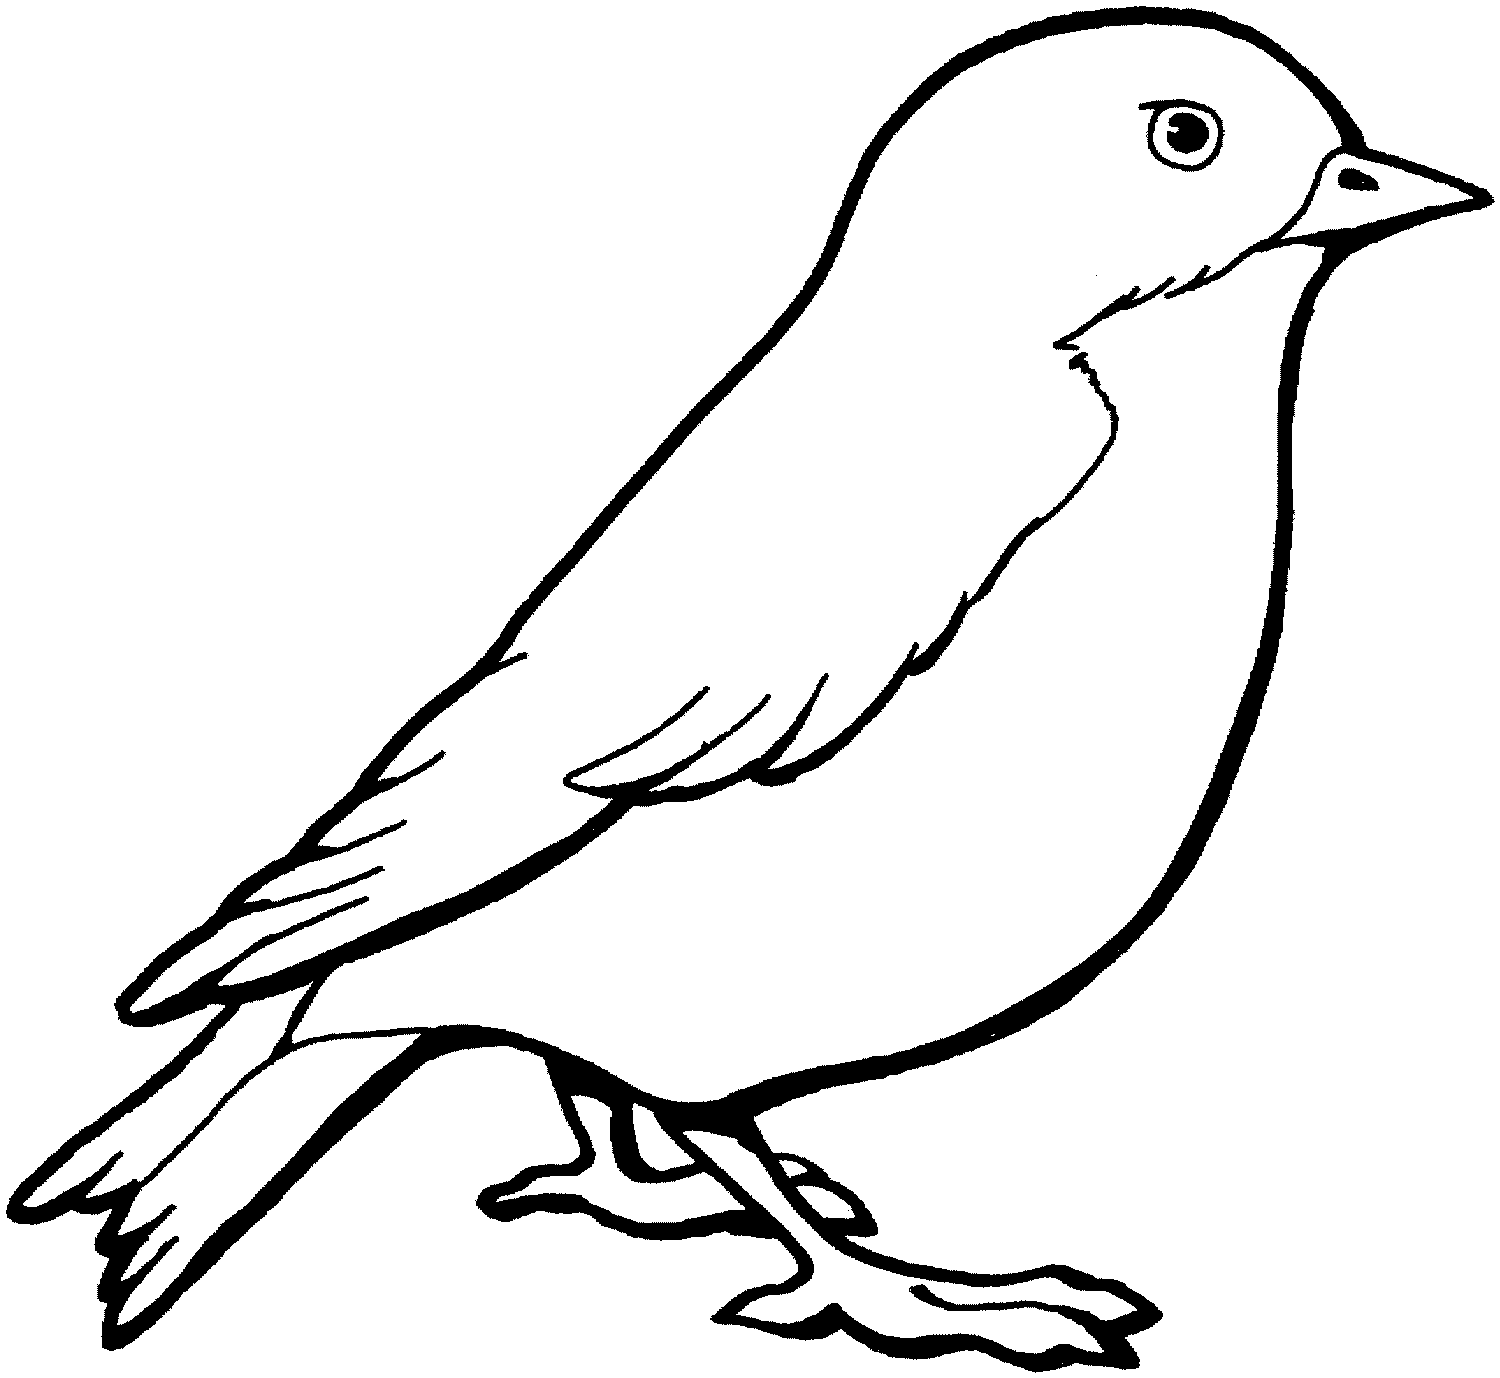 free printable bird coloring pages bird coloring sheet bird coloring pages bird drawings bird free coloring pages printable 